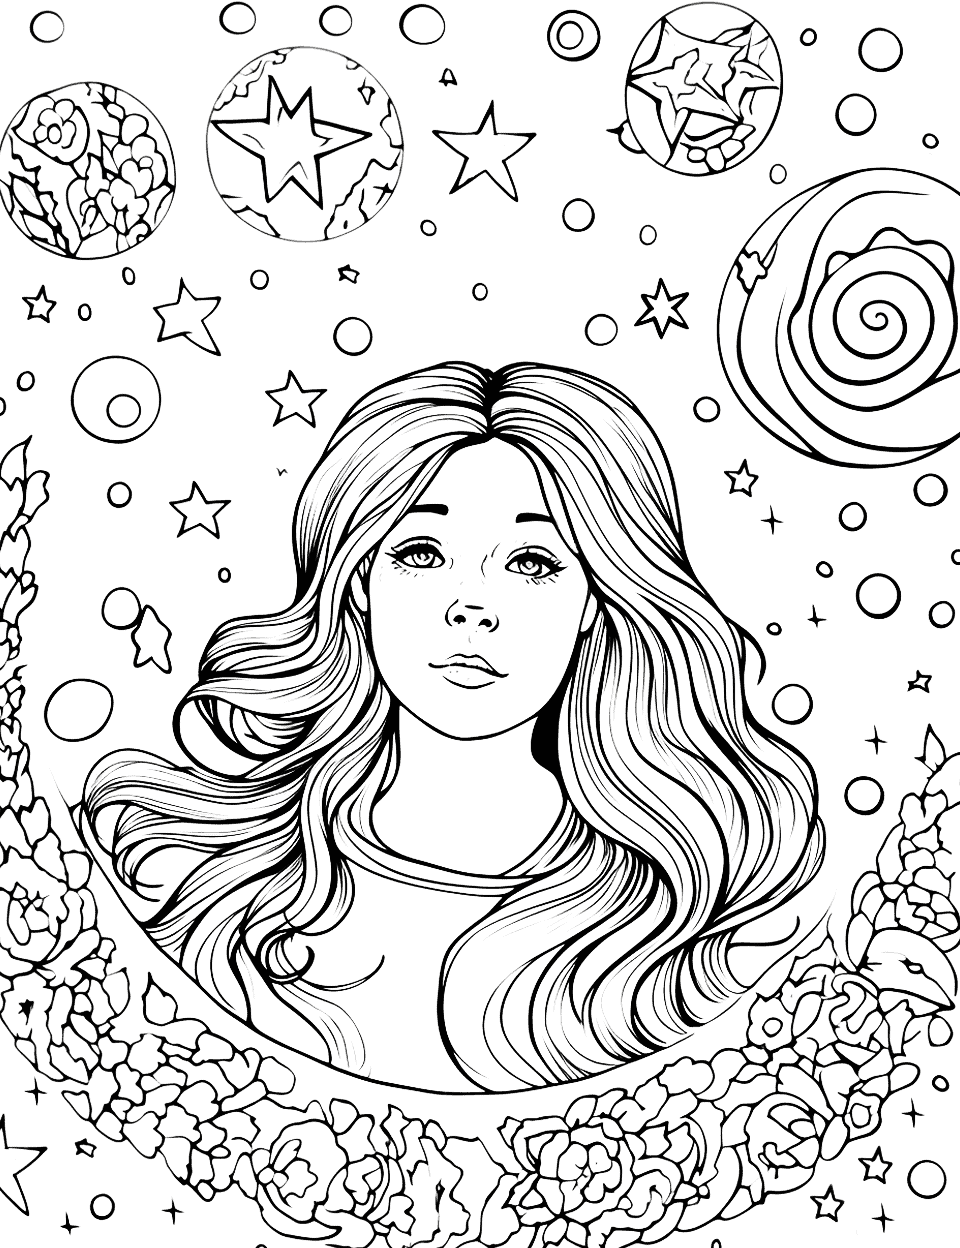 Galaxy Girl Adult Coloring Page - A girl floating in space with detailed galaxies around her.